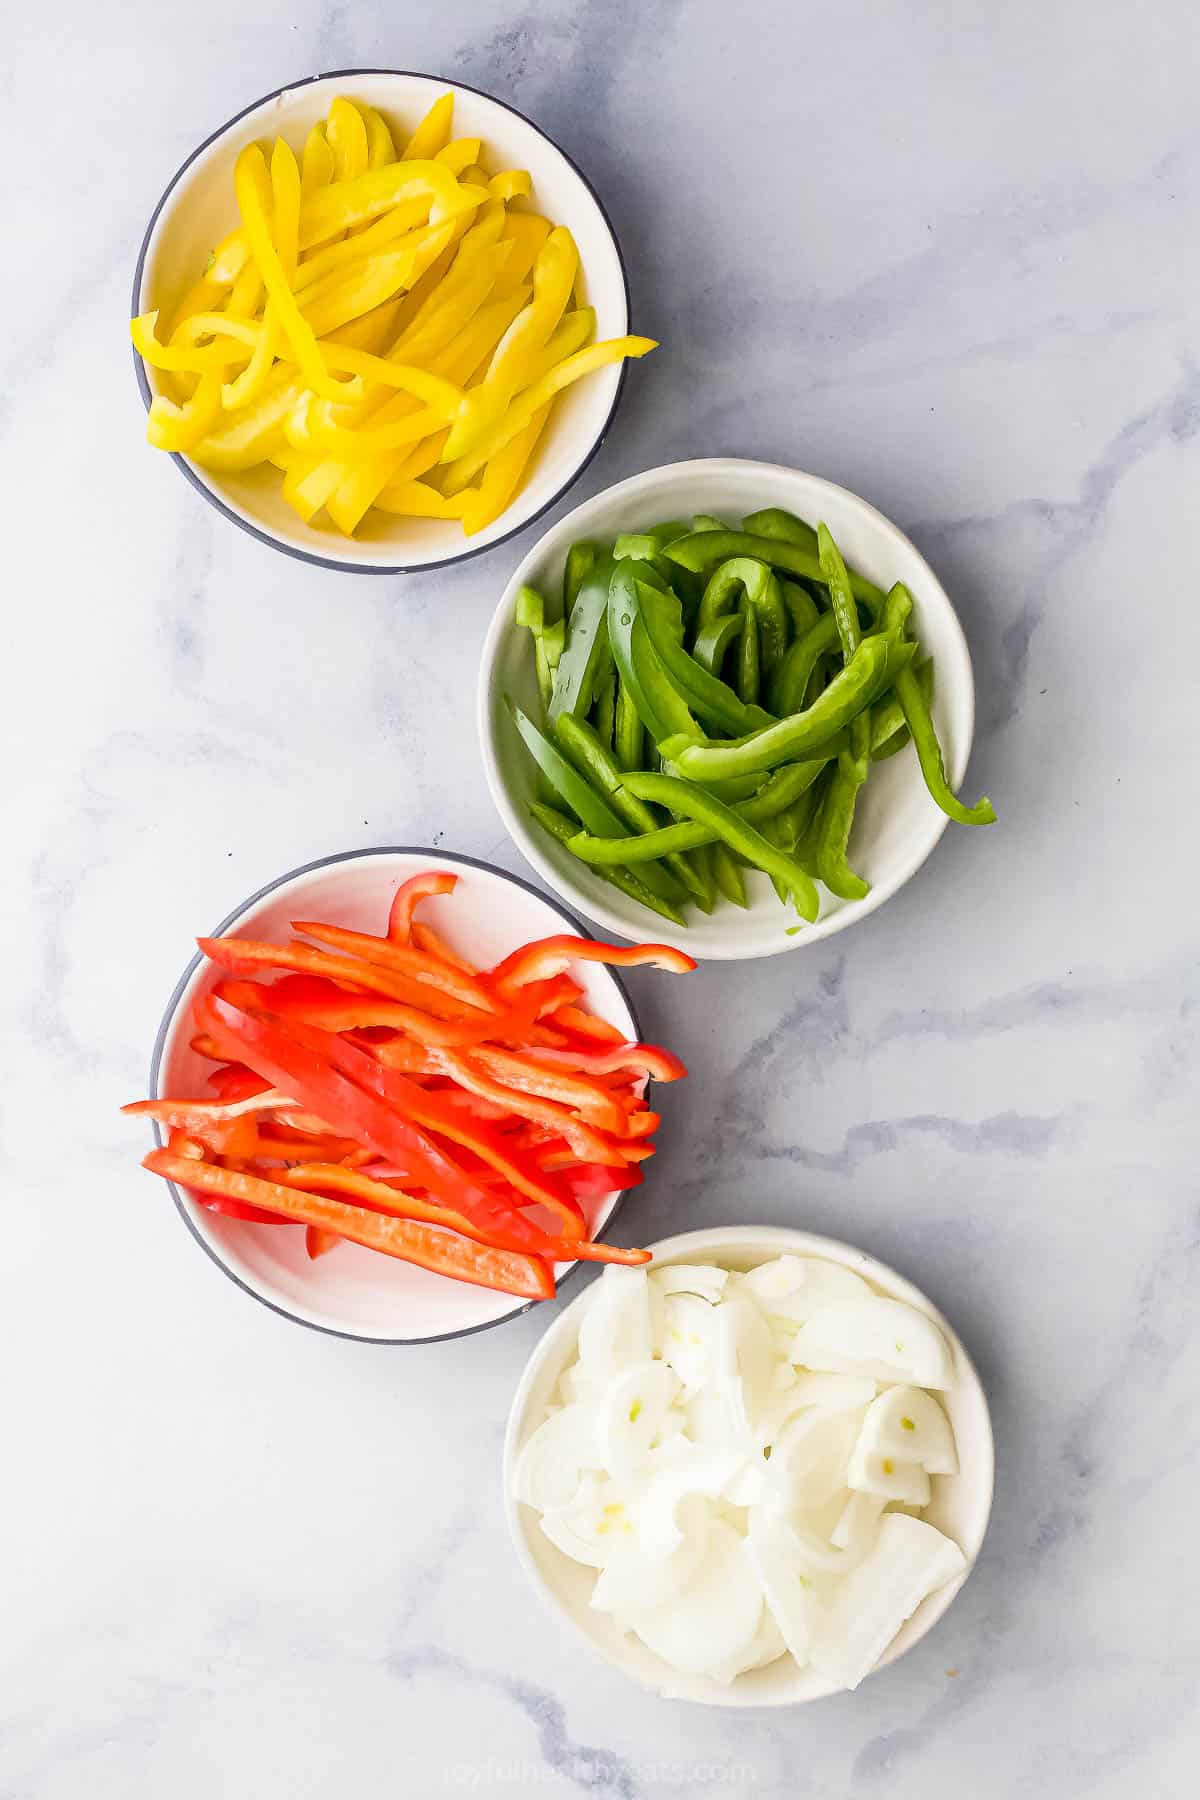 Yellow, green, and red bell peppers and yellow onion sliced in bowls